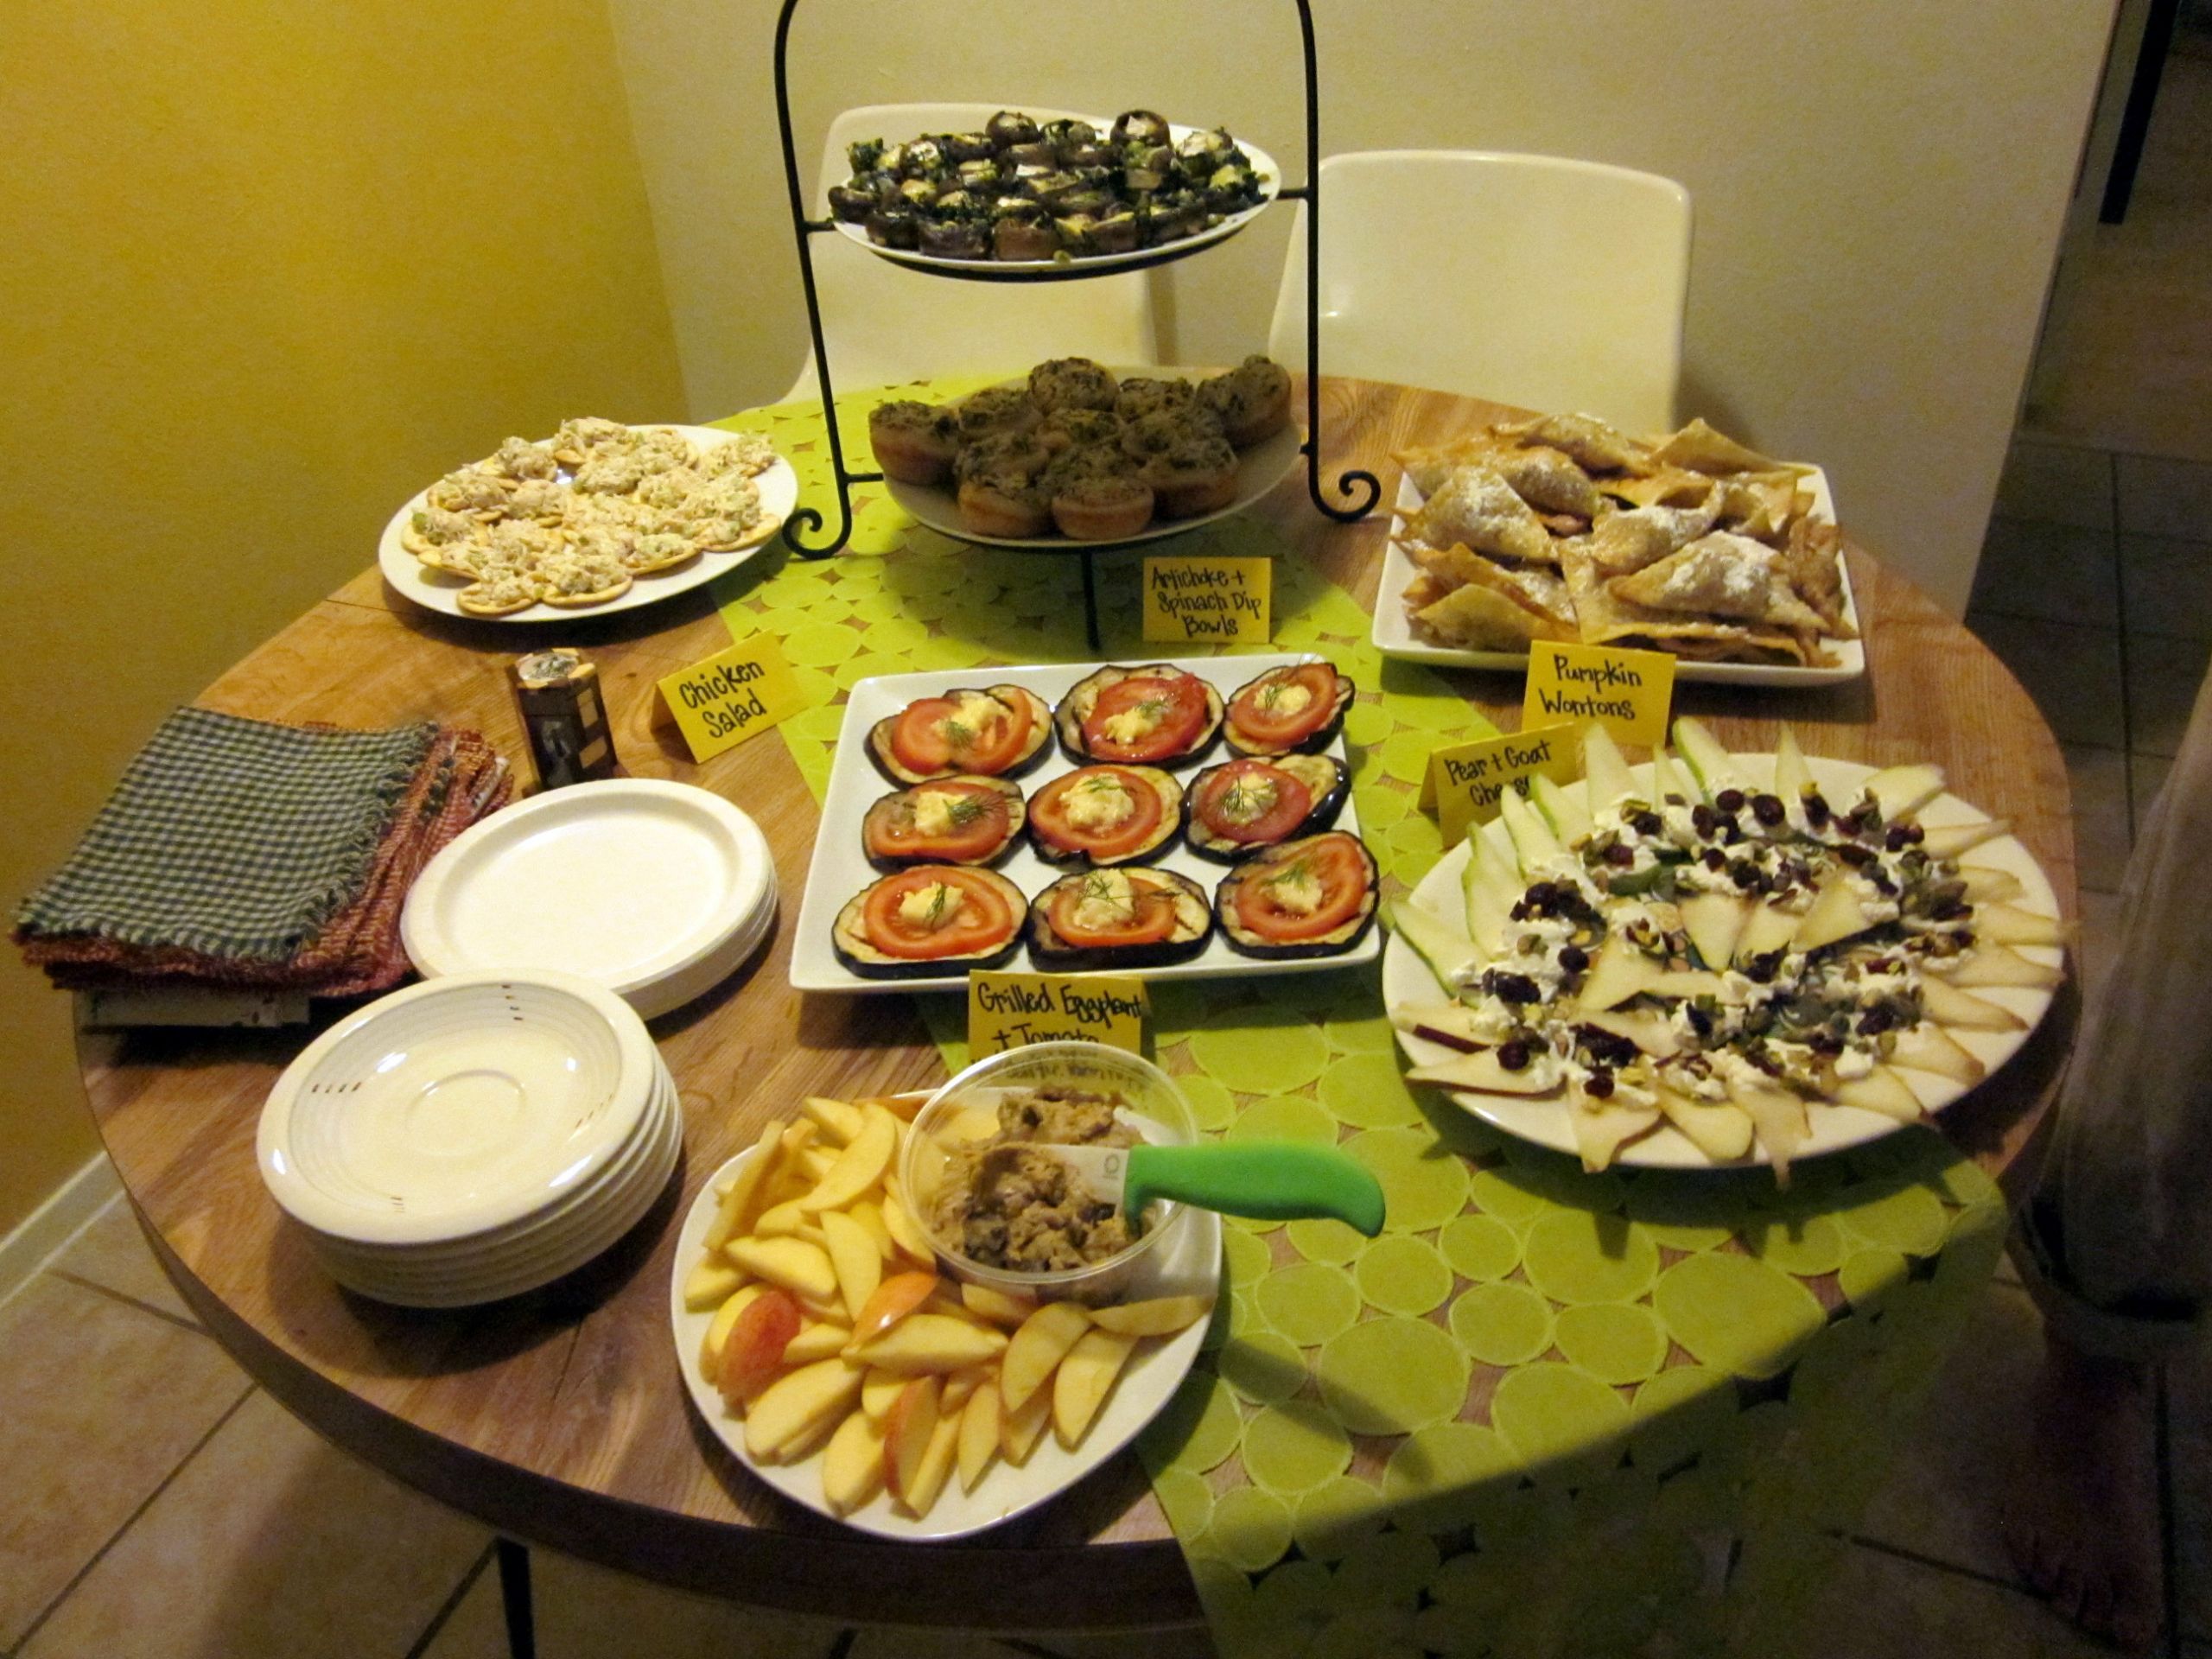 House Party Food Ideas
 Housewarming – Fall Party Food